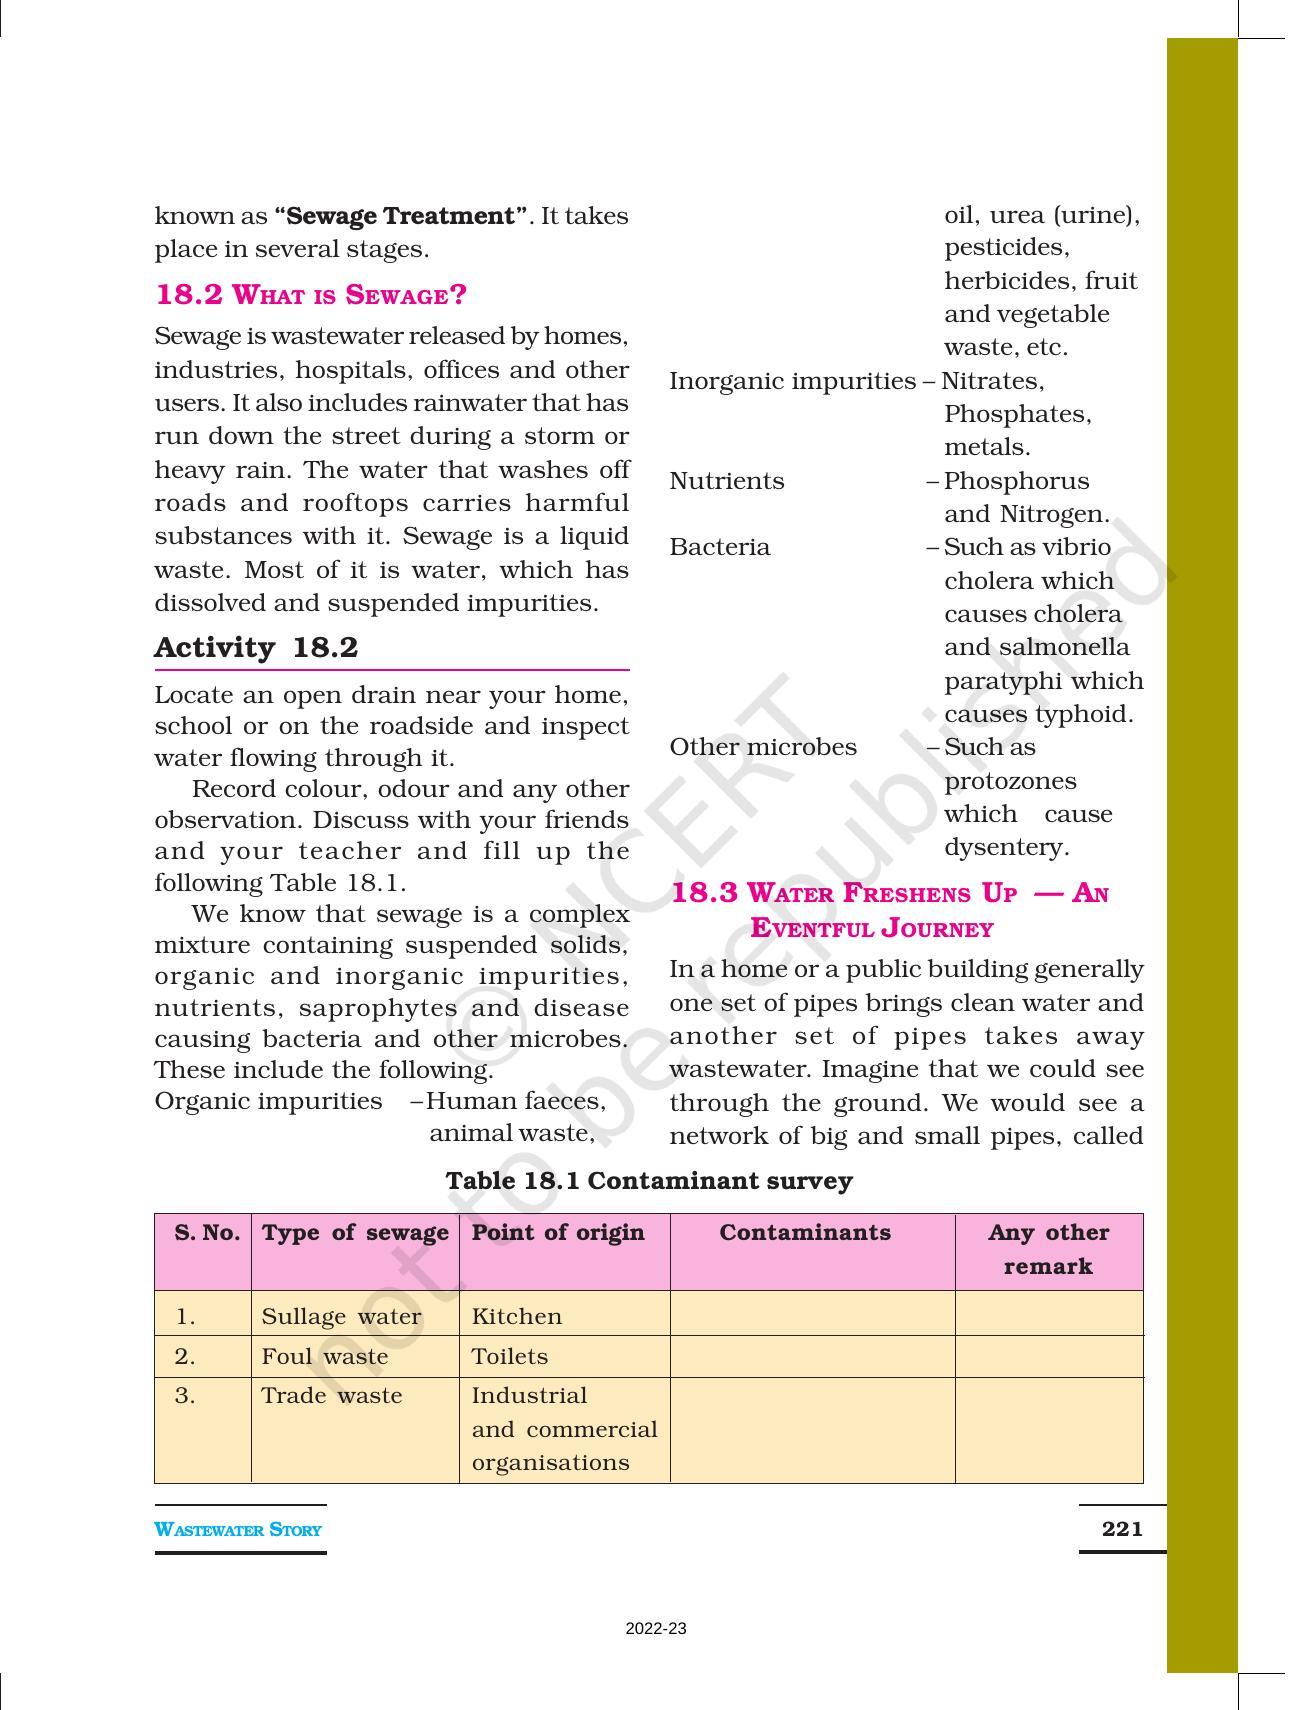 NCERT Book for Class 7 Science: Chapter 18-Wastewater Story - Page 2